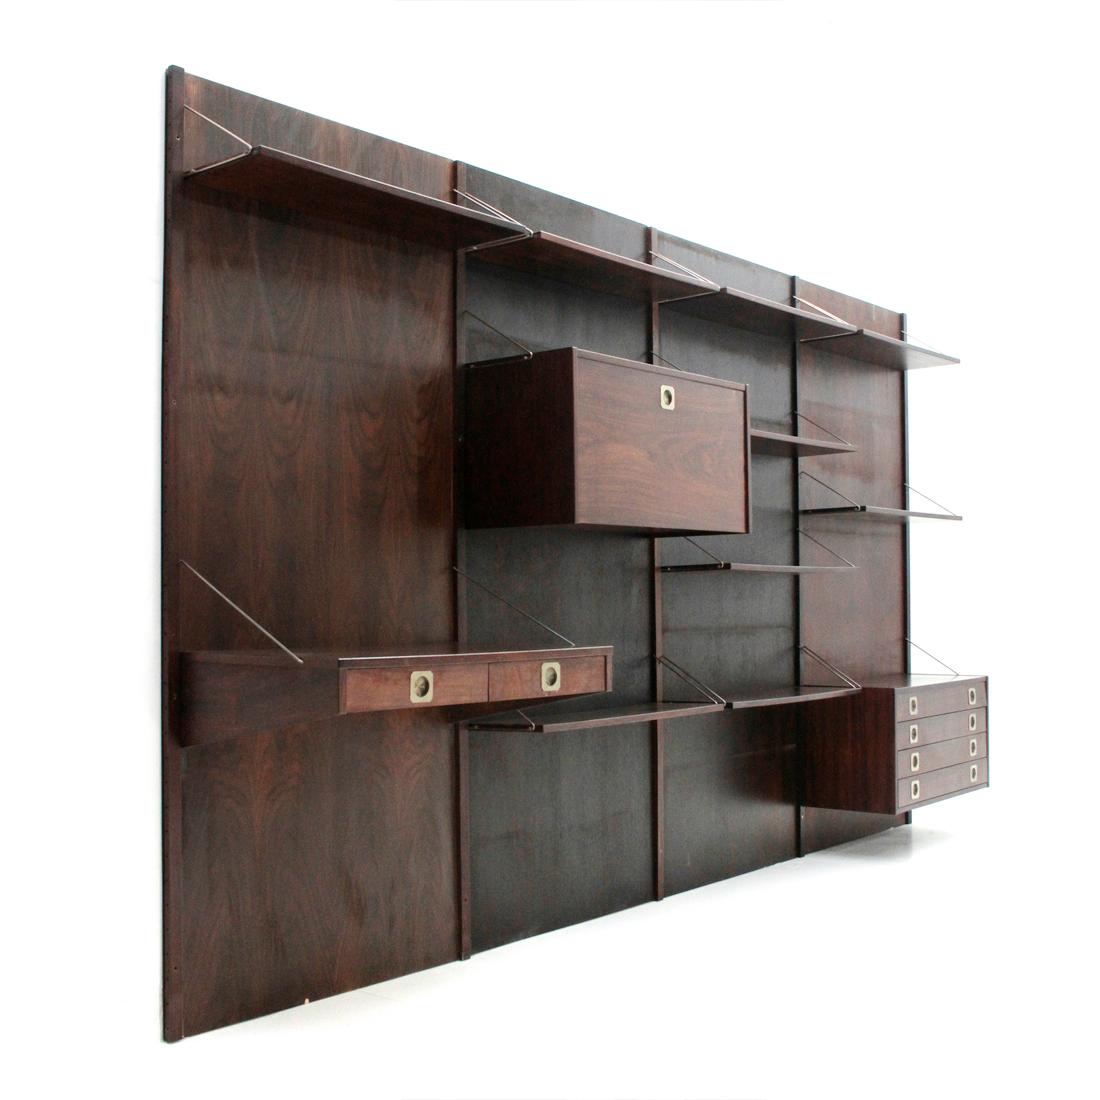 Large wall bookcase produced in the 1960s by Stildomus.
Solid wood uprights and back panels in veneered wood.
Mobile bar compartment, chest of drawers, shelves and desk with two drawers in veneered wood.
Handles and shelf supports, in